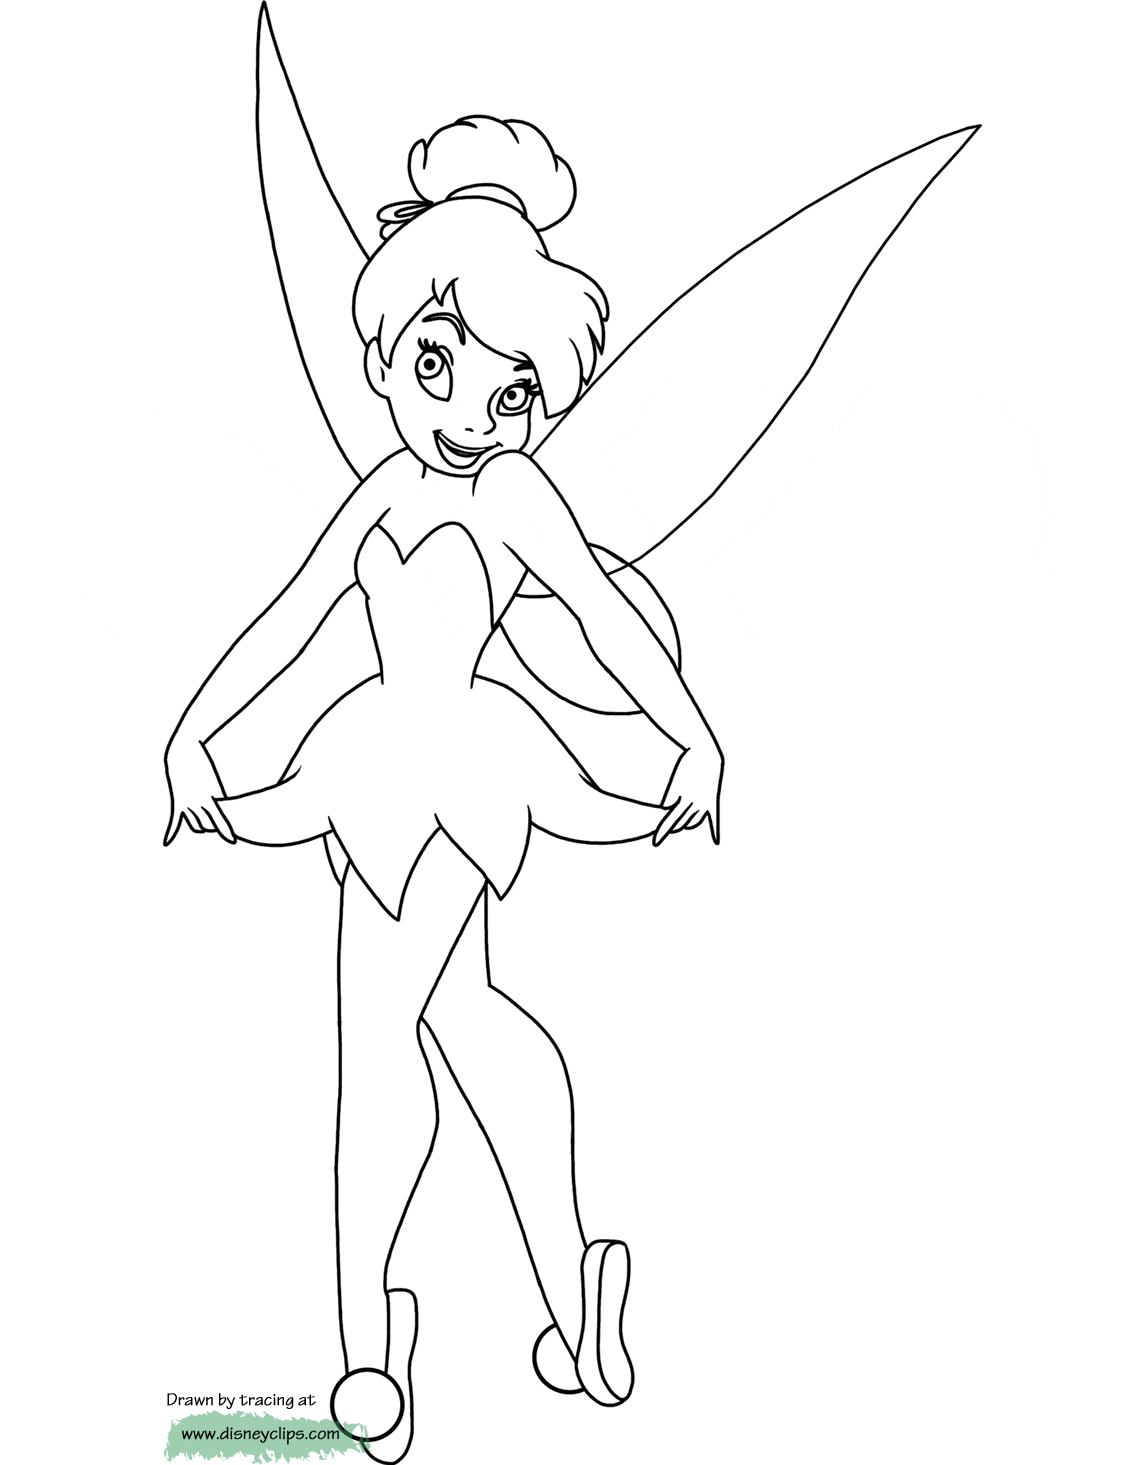 Download Disney Fairies' Tinker Bell Coloring Pages | Disneyclips.com